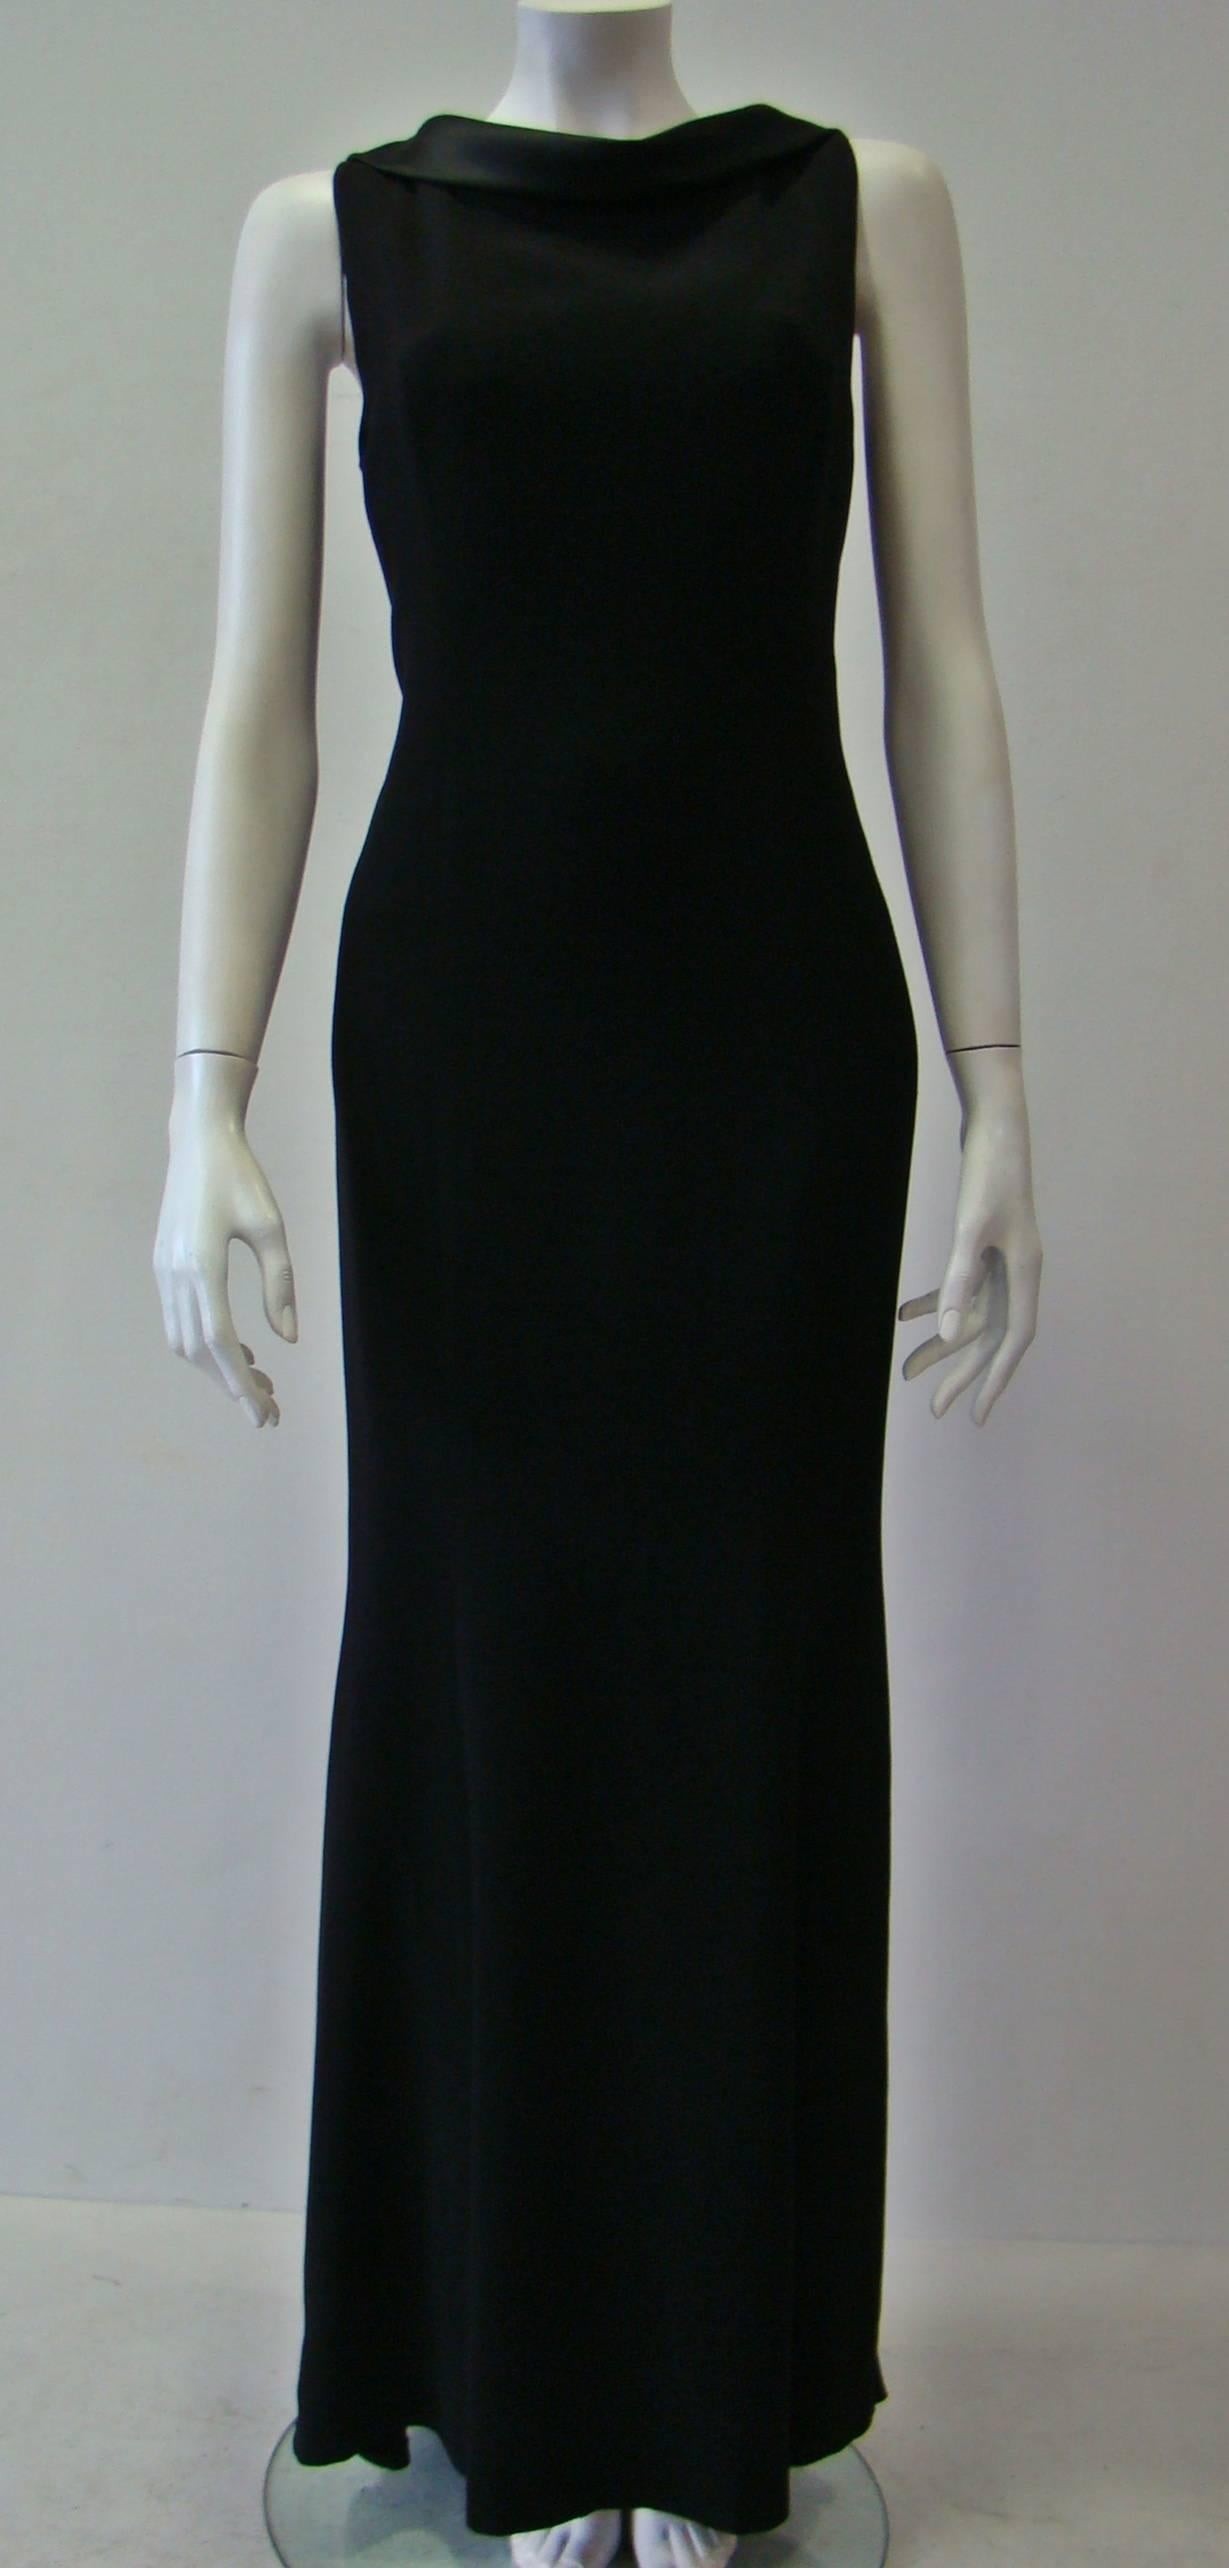 This Unique Angelo Mozzillo Dress Has A Bygone Elegance. A Very Impressive Design Featuring A Cowl Neck And A Striking Back With Straps That Wind From One Arm To The Other. It Has Full Lining And A Concealed Zip Fastening At Side And It Swoops Low